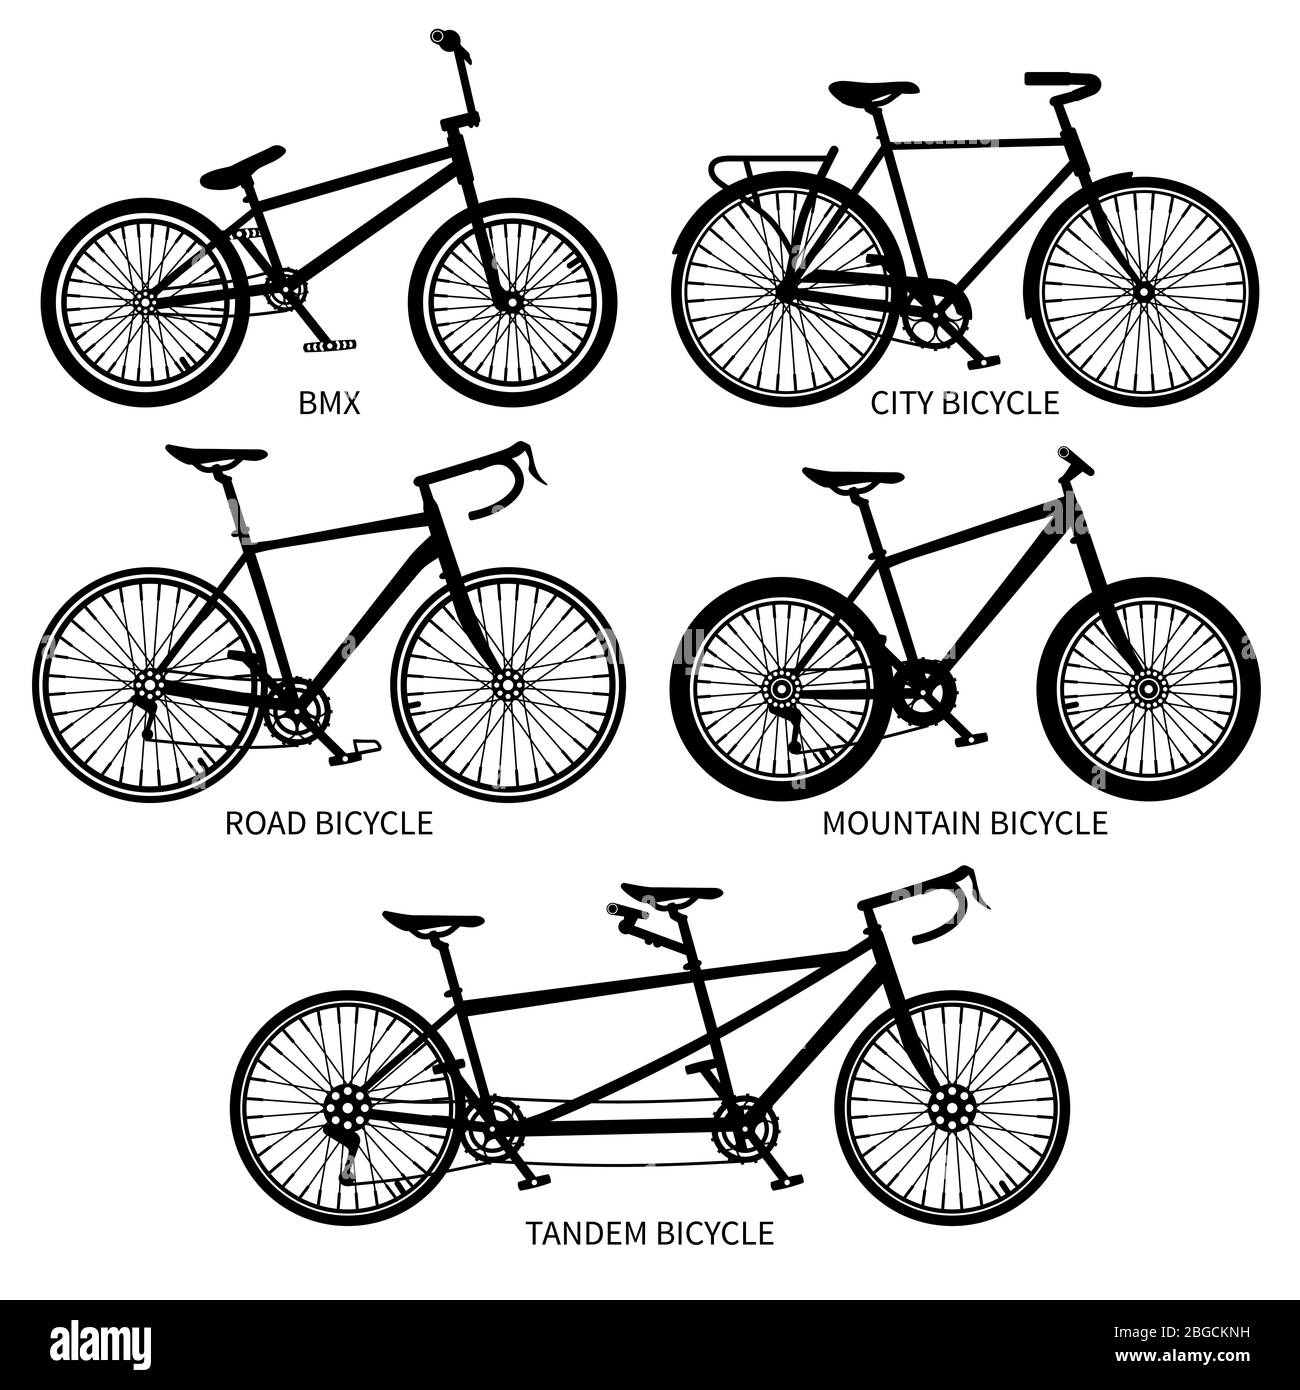 Bike types vector black silhouettes. Road, mountain, tandem bicycles isolated. Set of bicycle vintage, sport transport with pedal illustration Stock Vector